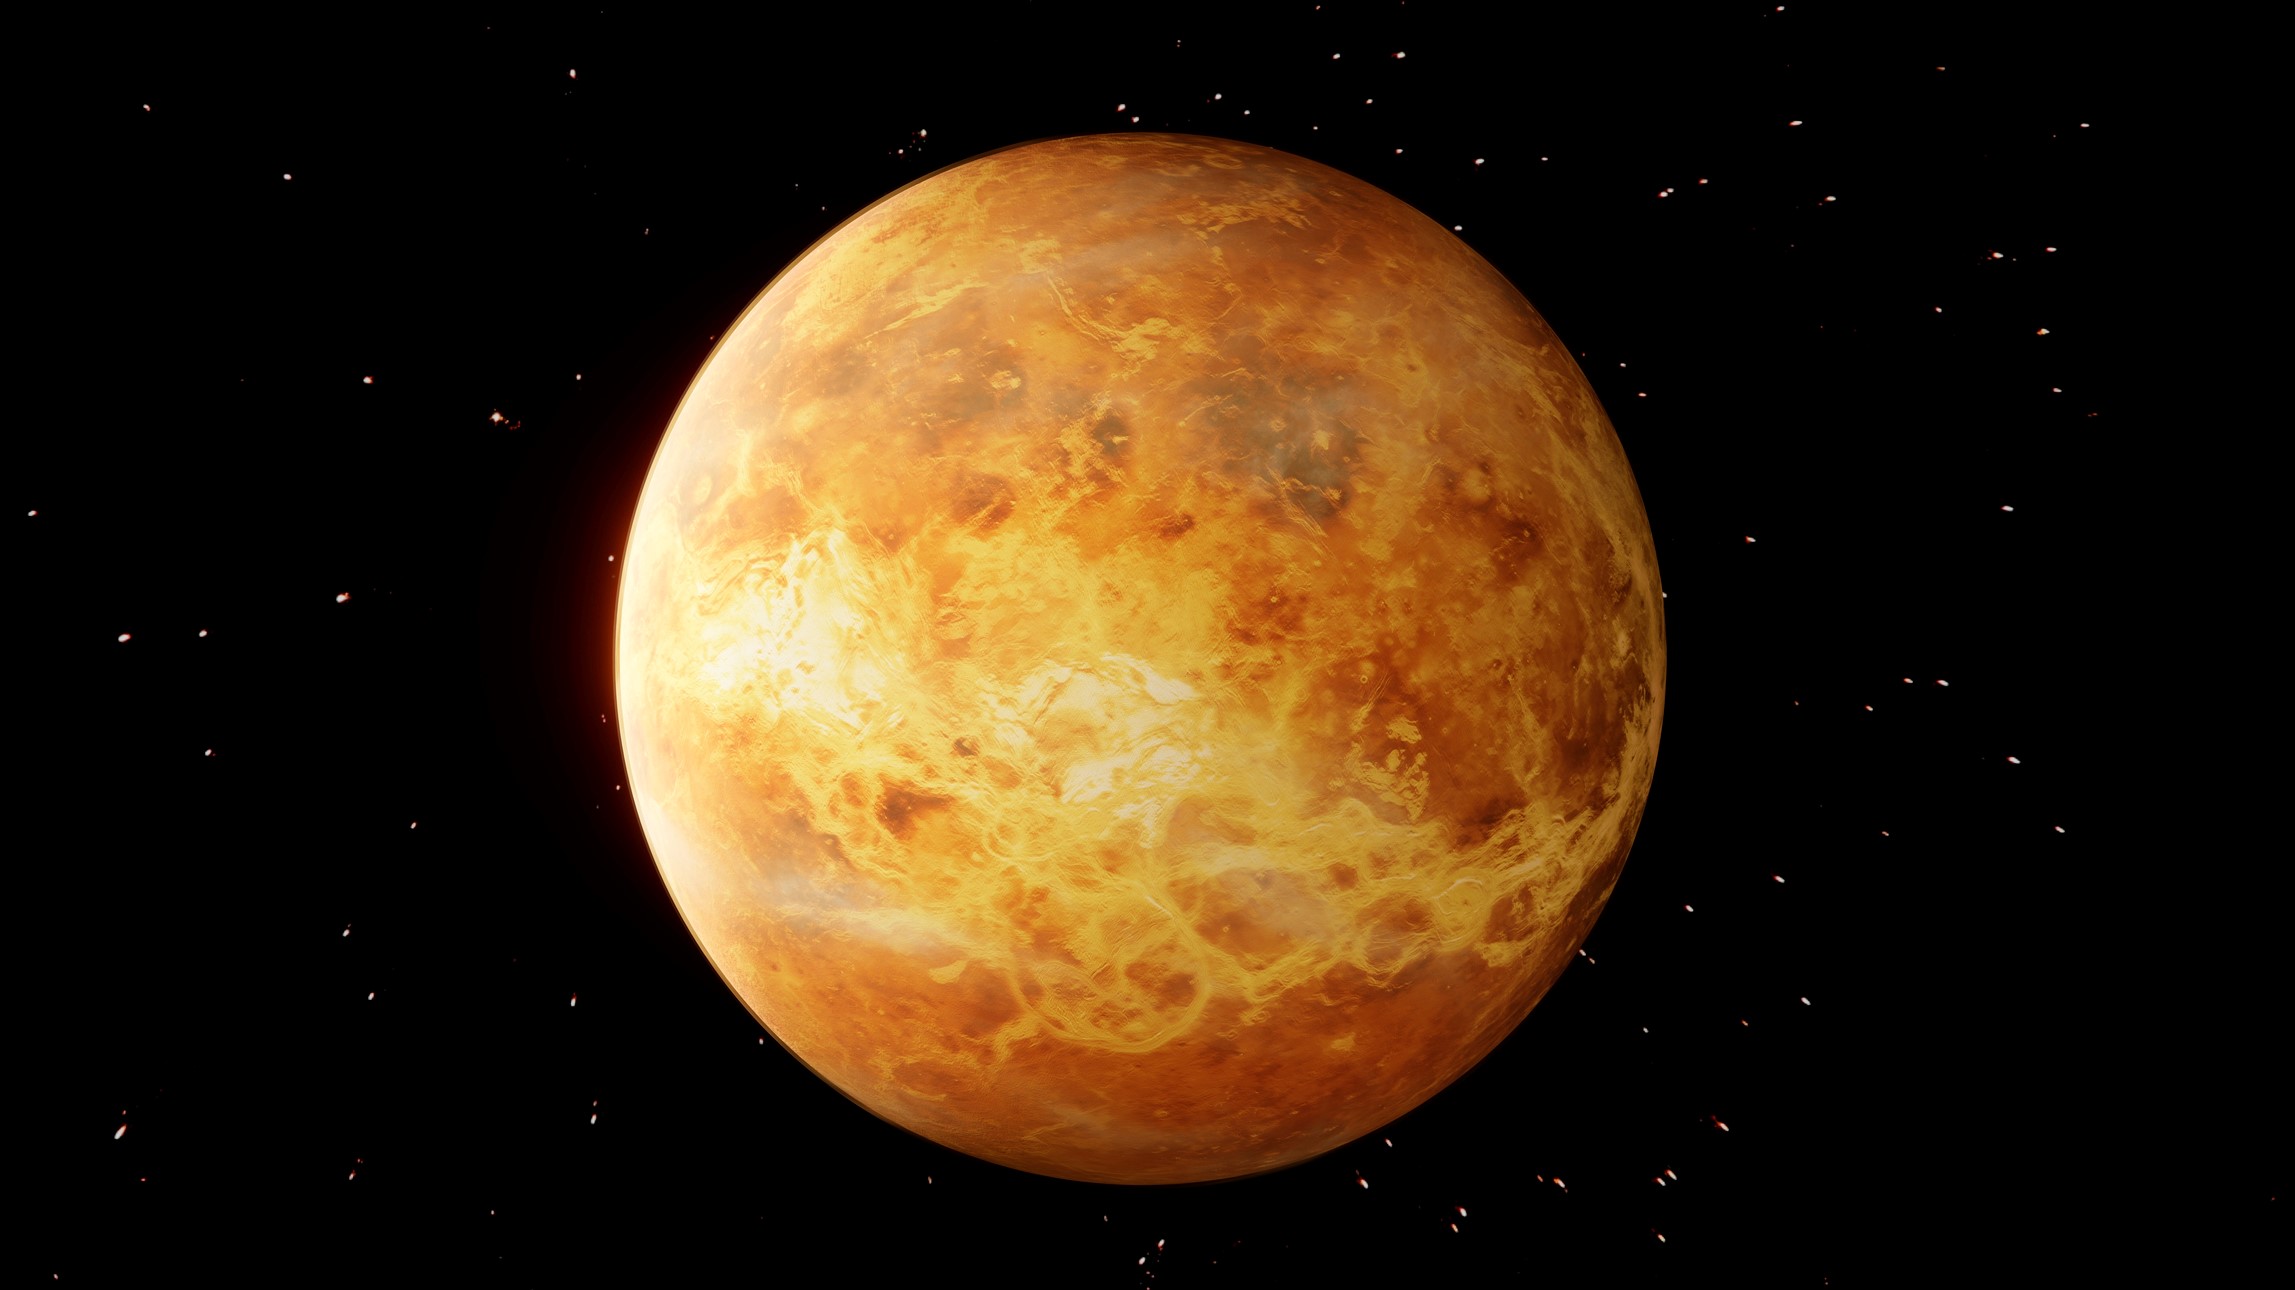 Venus: The scorching second planet from the sun